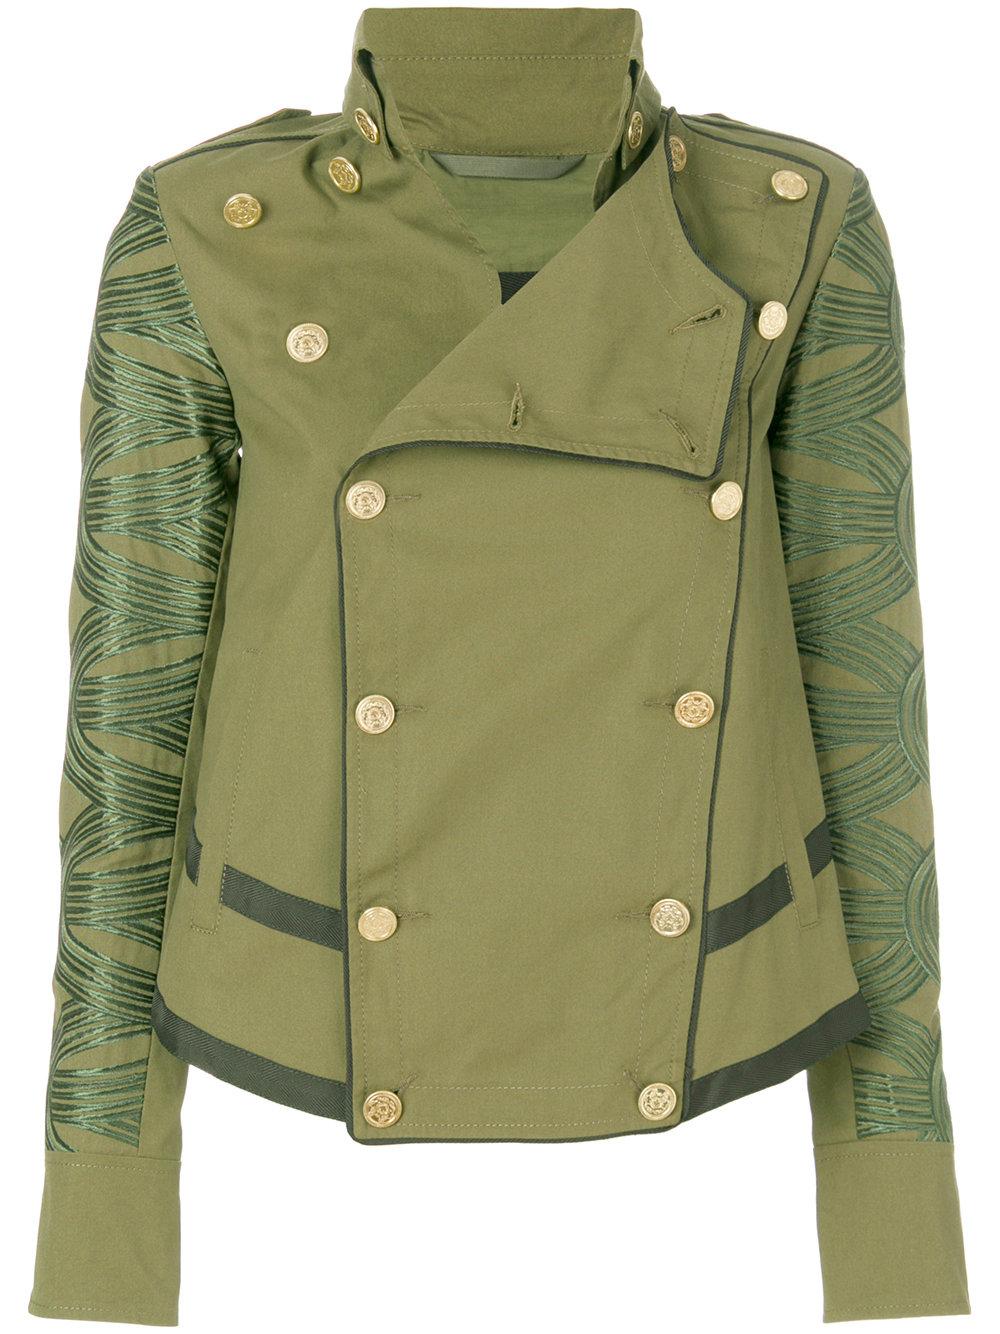 12 Army Jackets to Up Your Streetwear Game | Who What Wear